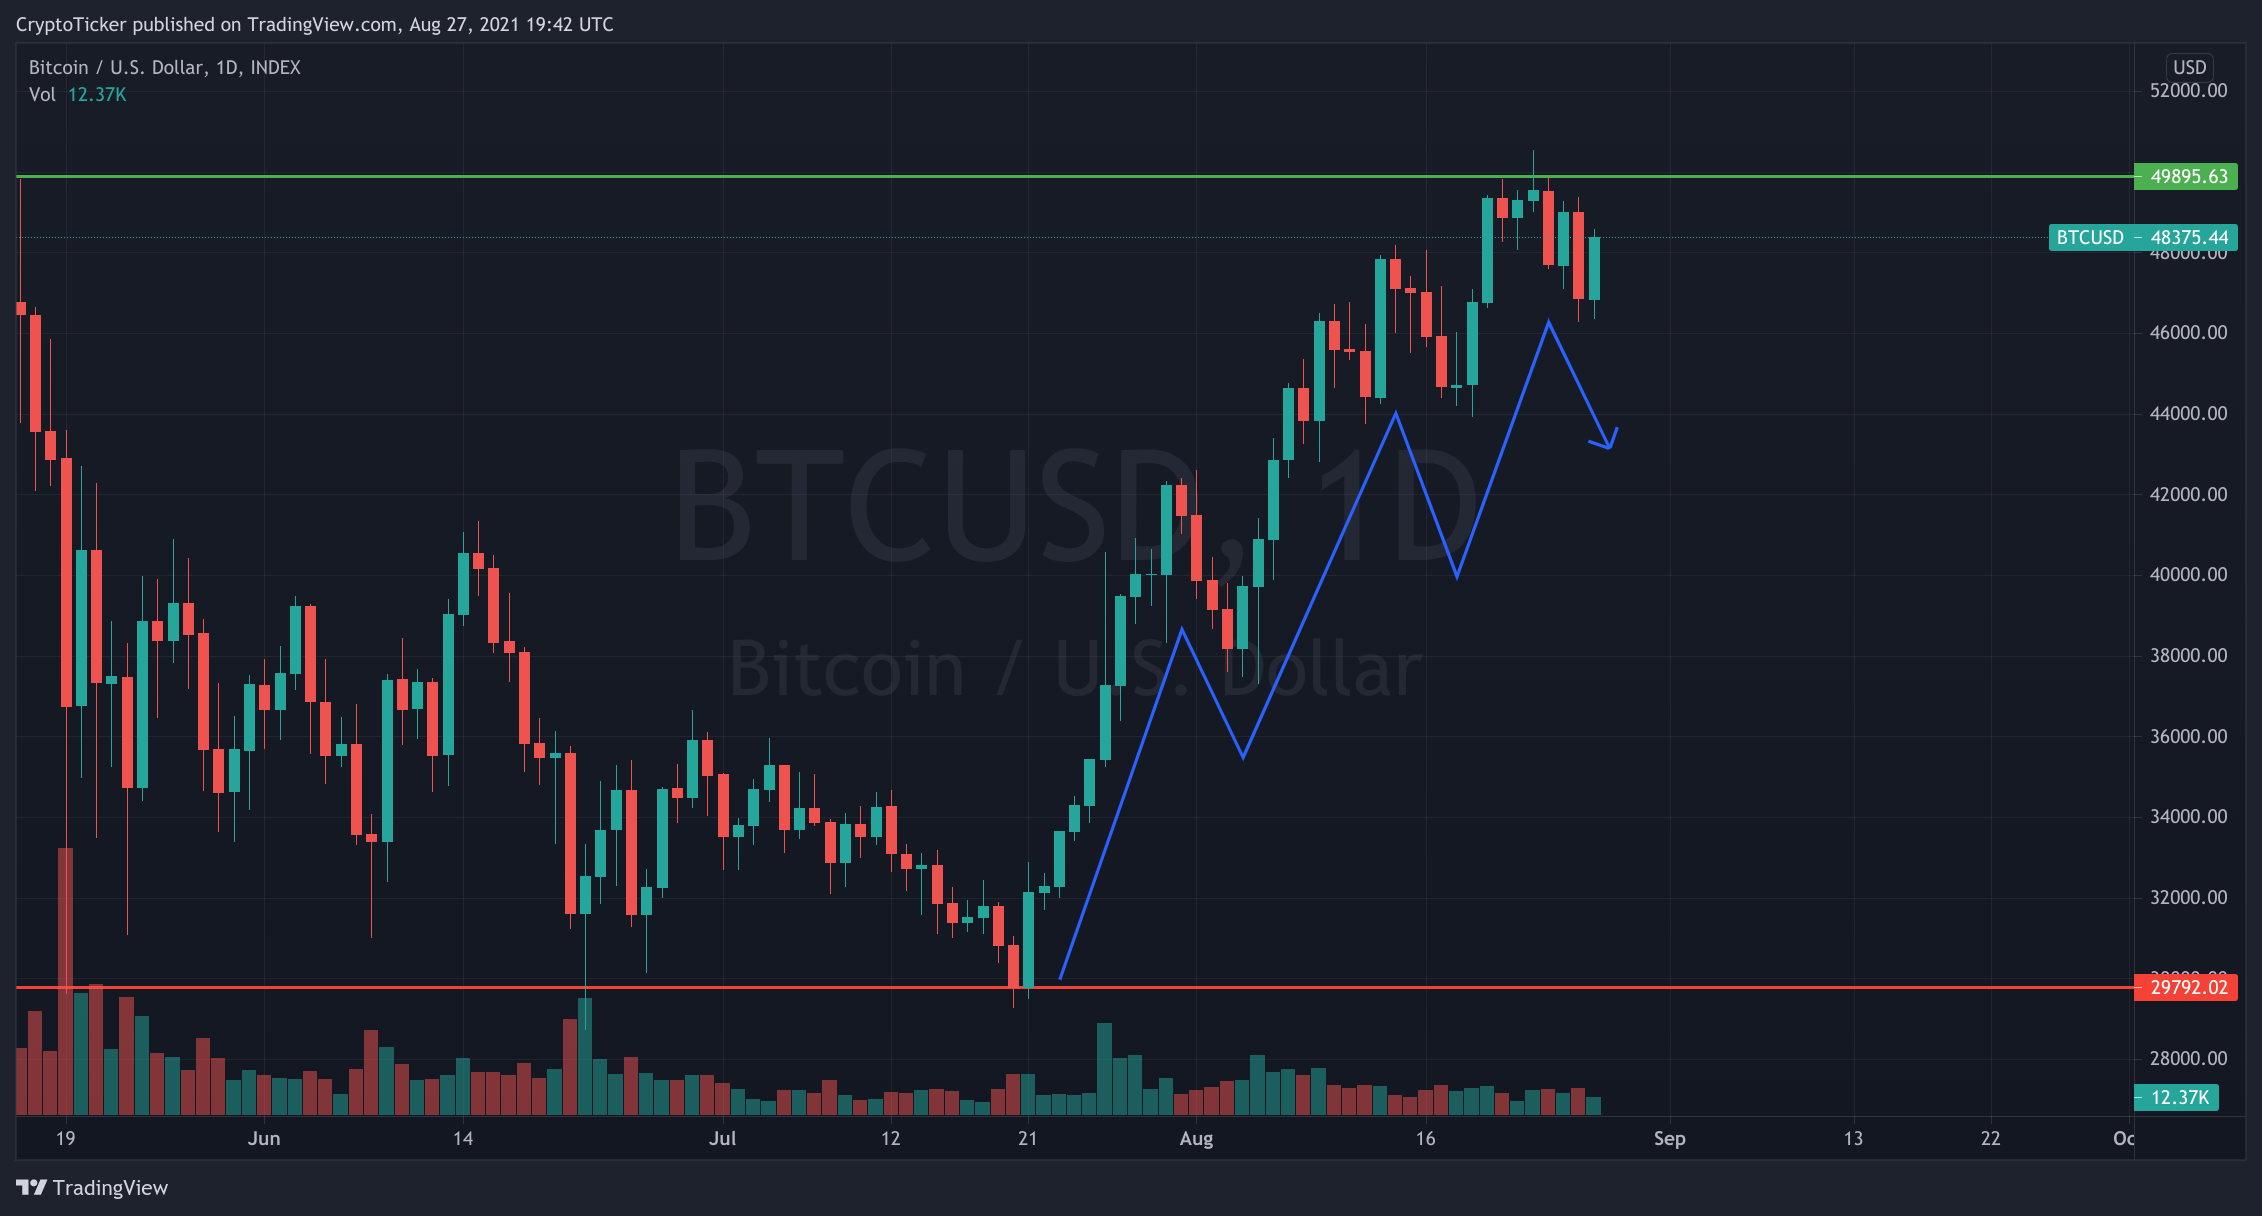 BTC/USD 1-day chart showing the healthy uptrend of Bitcoin 60K